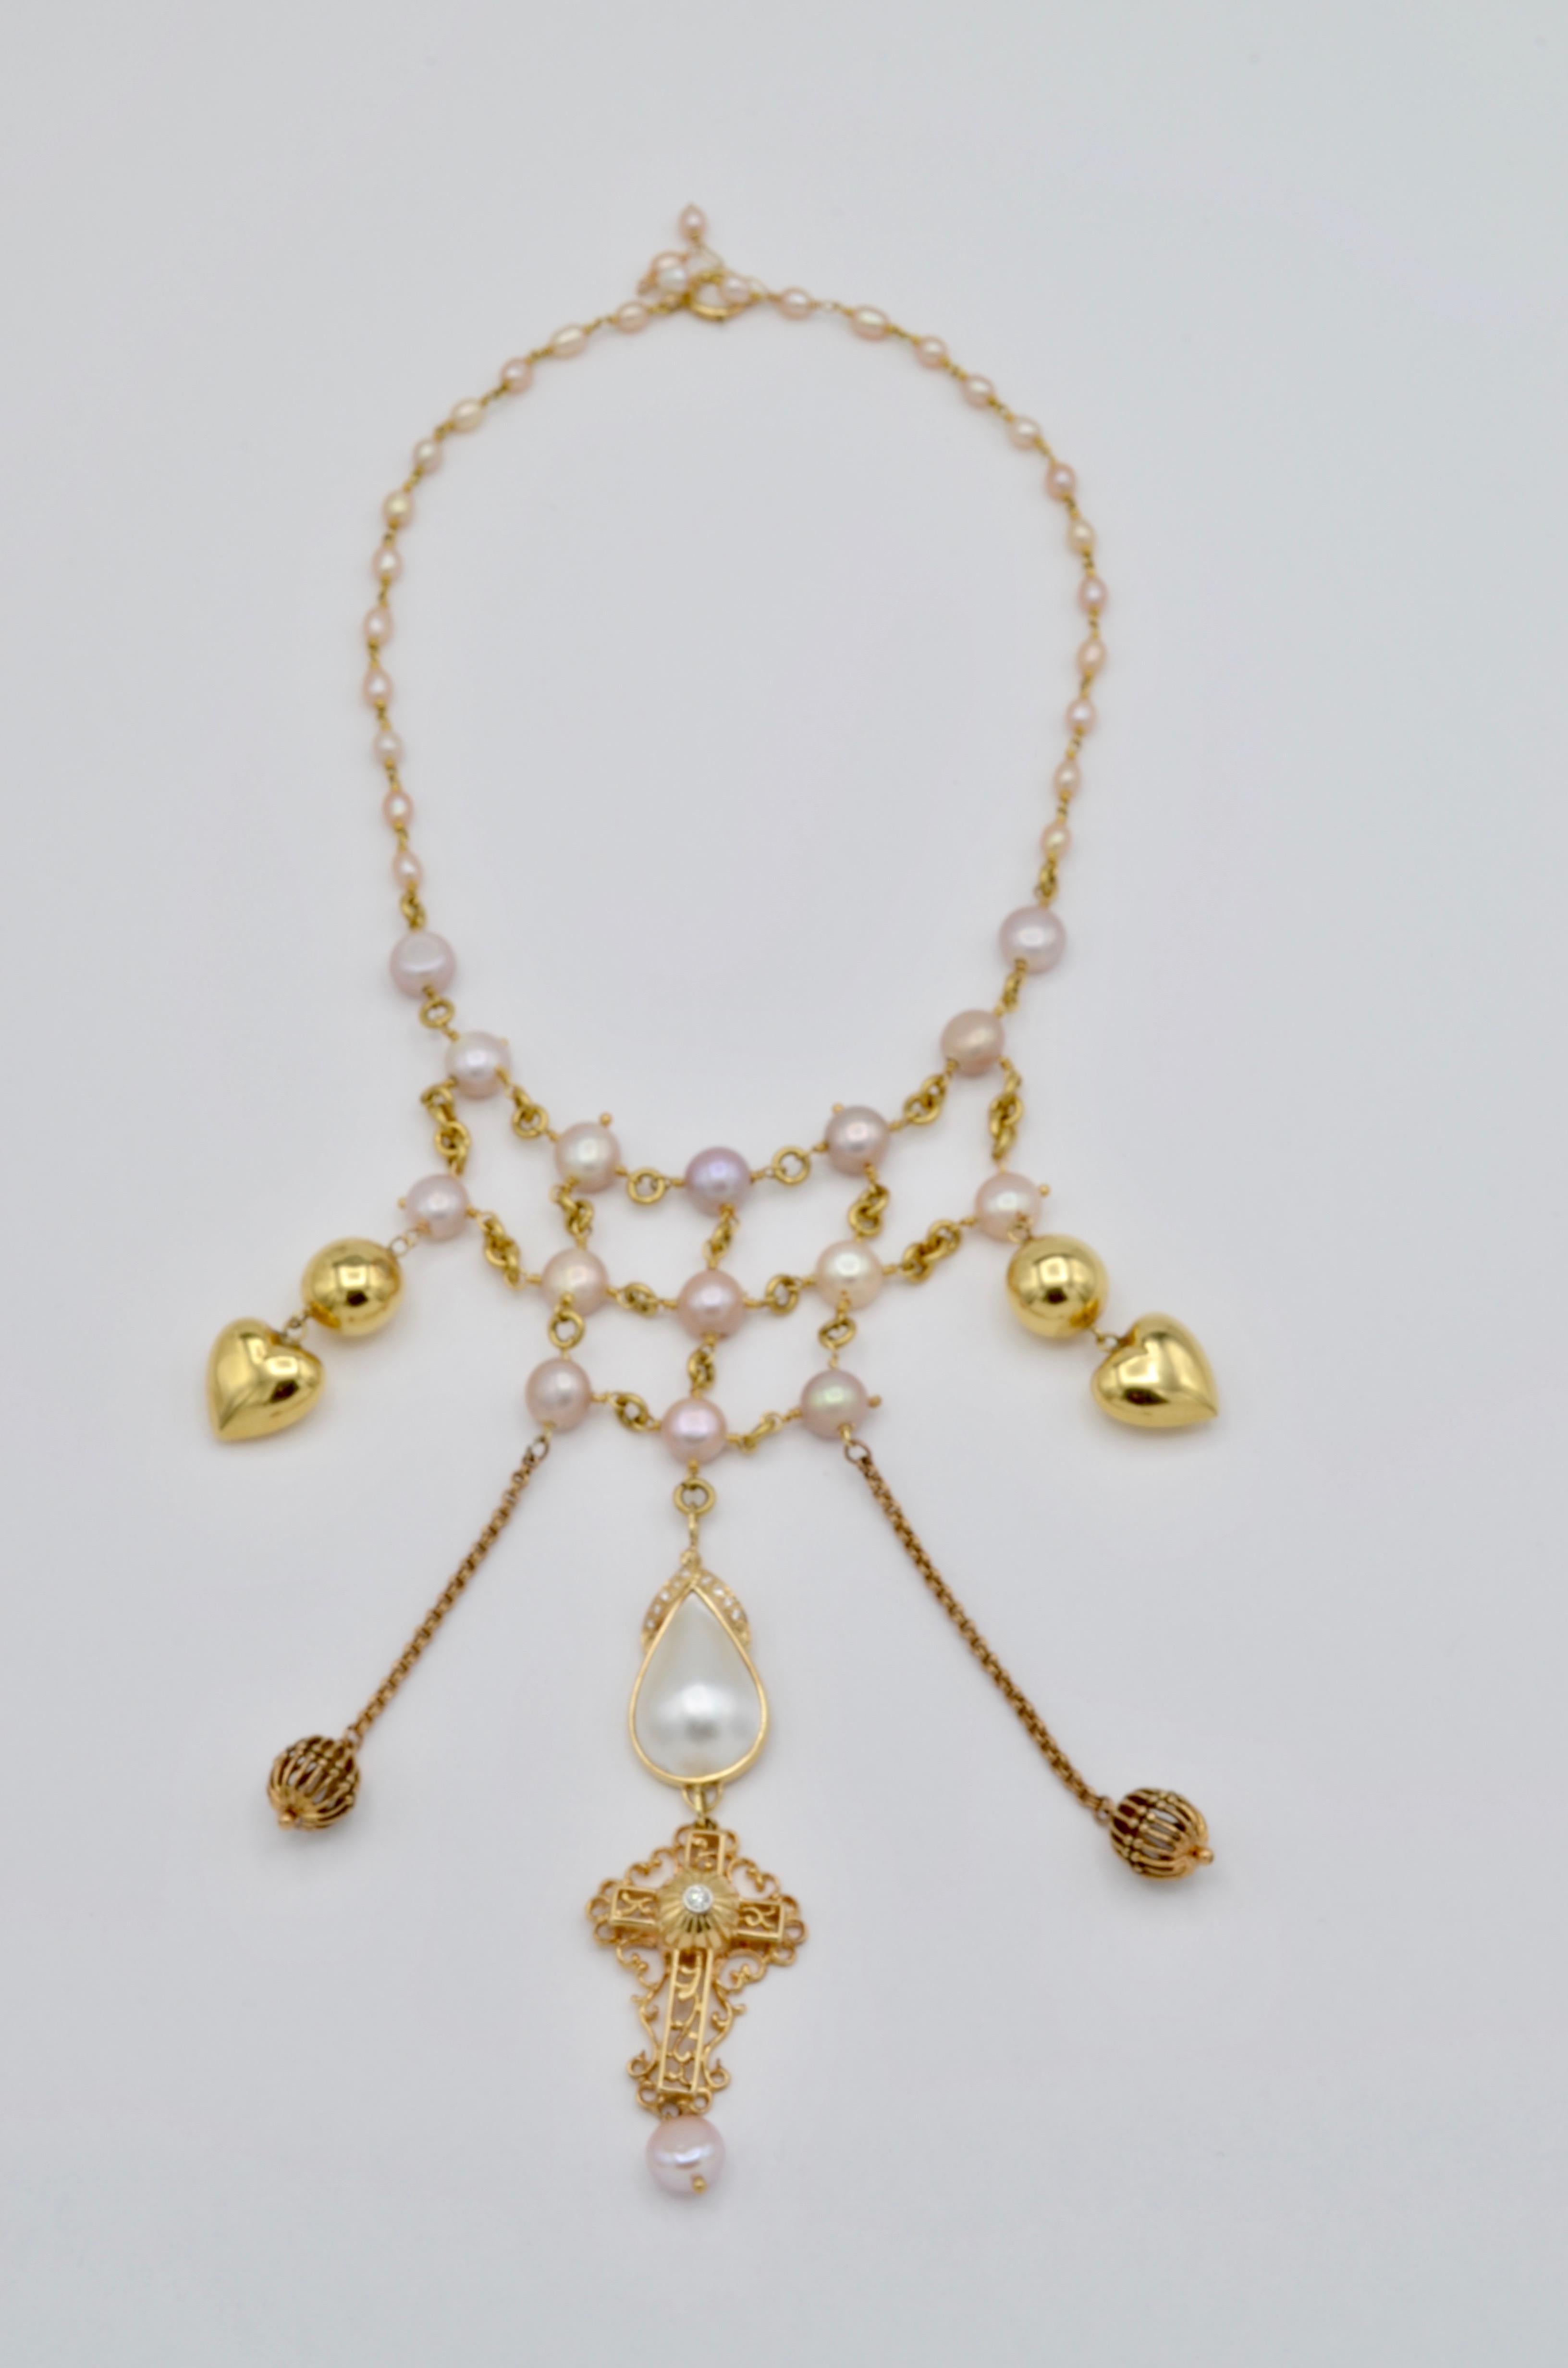 Pink fresh water pearls, a tear drop mabe pearl, gold hearts, diamonds, and a cross create this fashionable statement piece. All 14K yellow gold in a Versace-like style, this statement piece is made to dazzle. Chic, glamorous, and absolutely